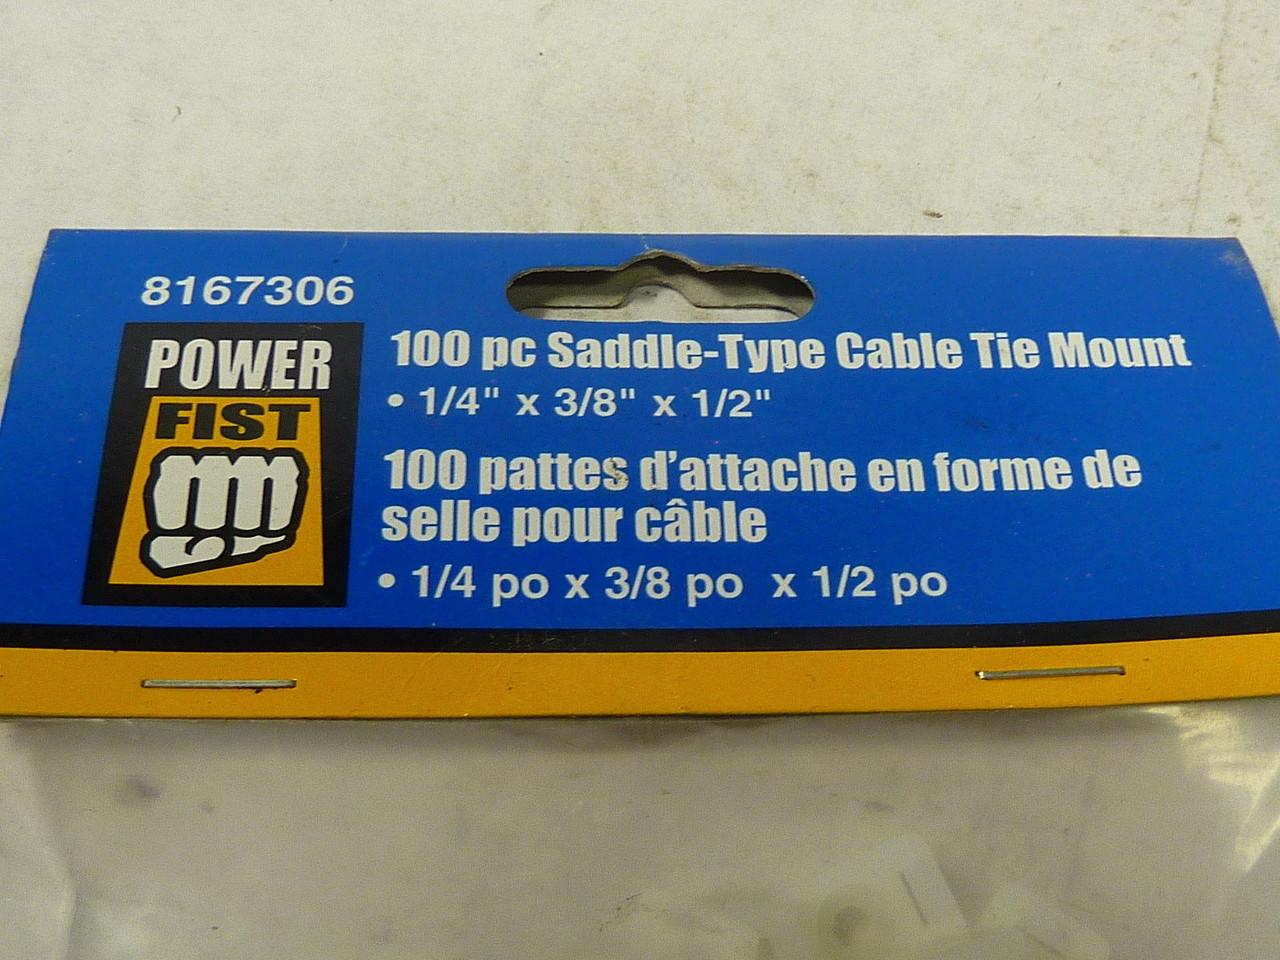 Power Fist 8167306 Saddle-Type Cable Tie Mounts 1/4x3/8x1/2" ! NEW !